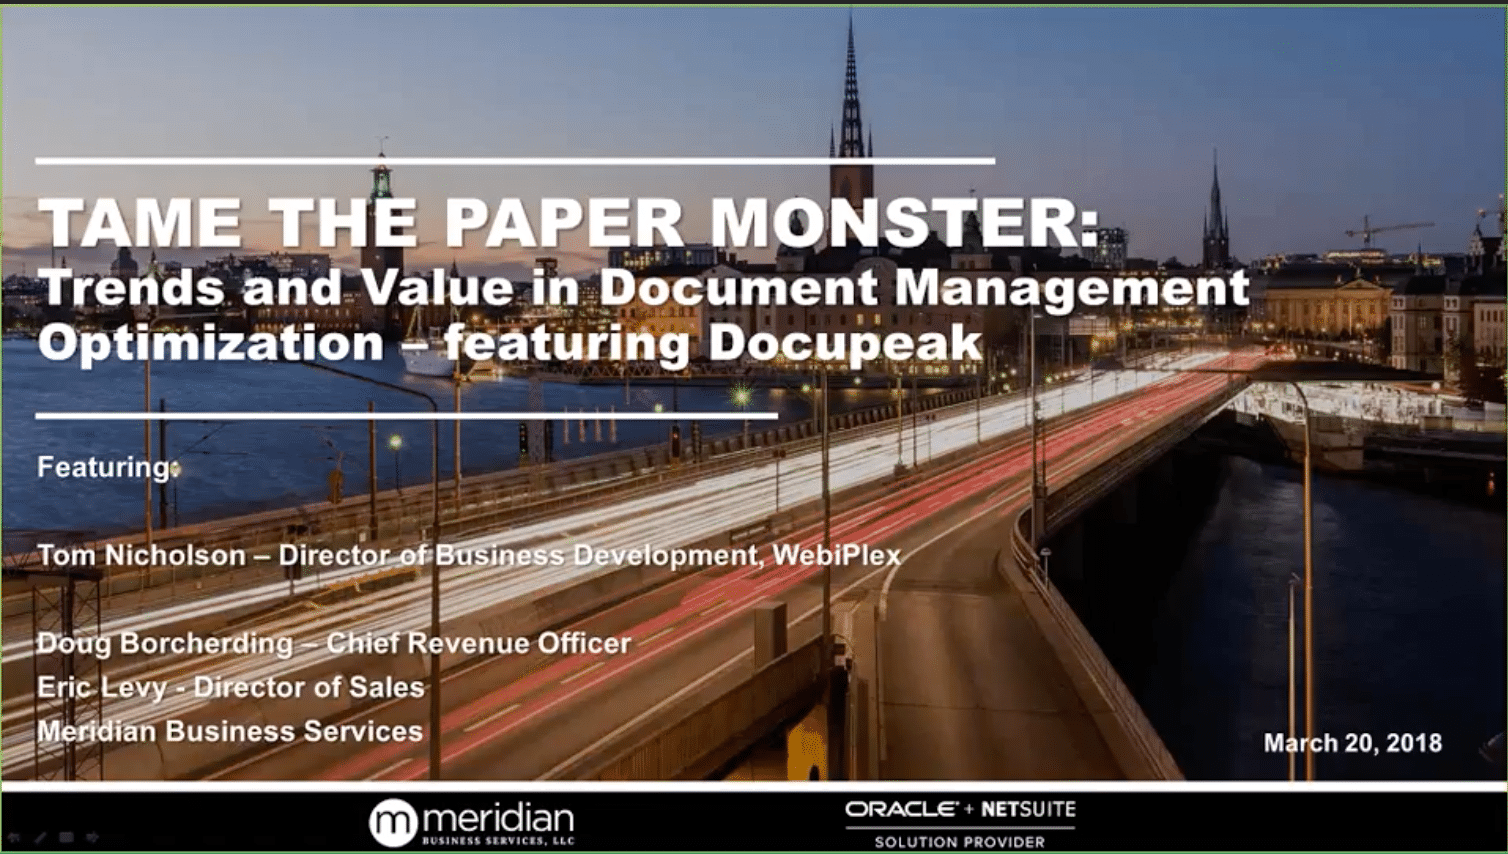 Tame the Paper Monster-Trends and Value in Document Management Optimization featuring DocuPeak